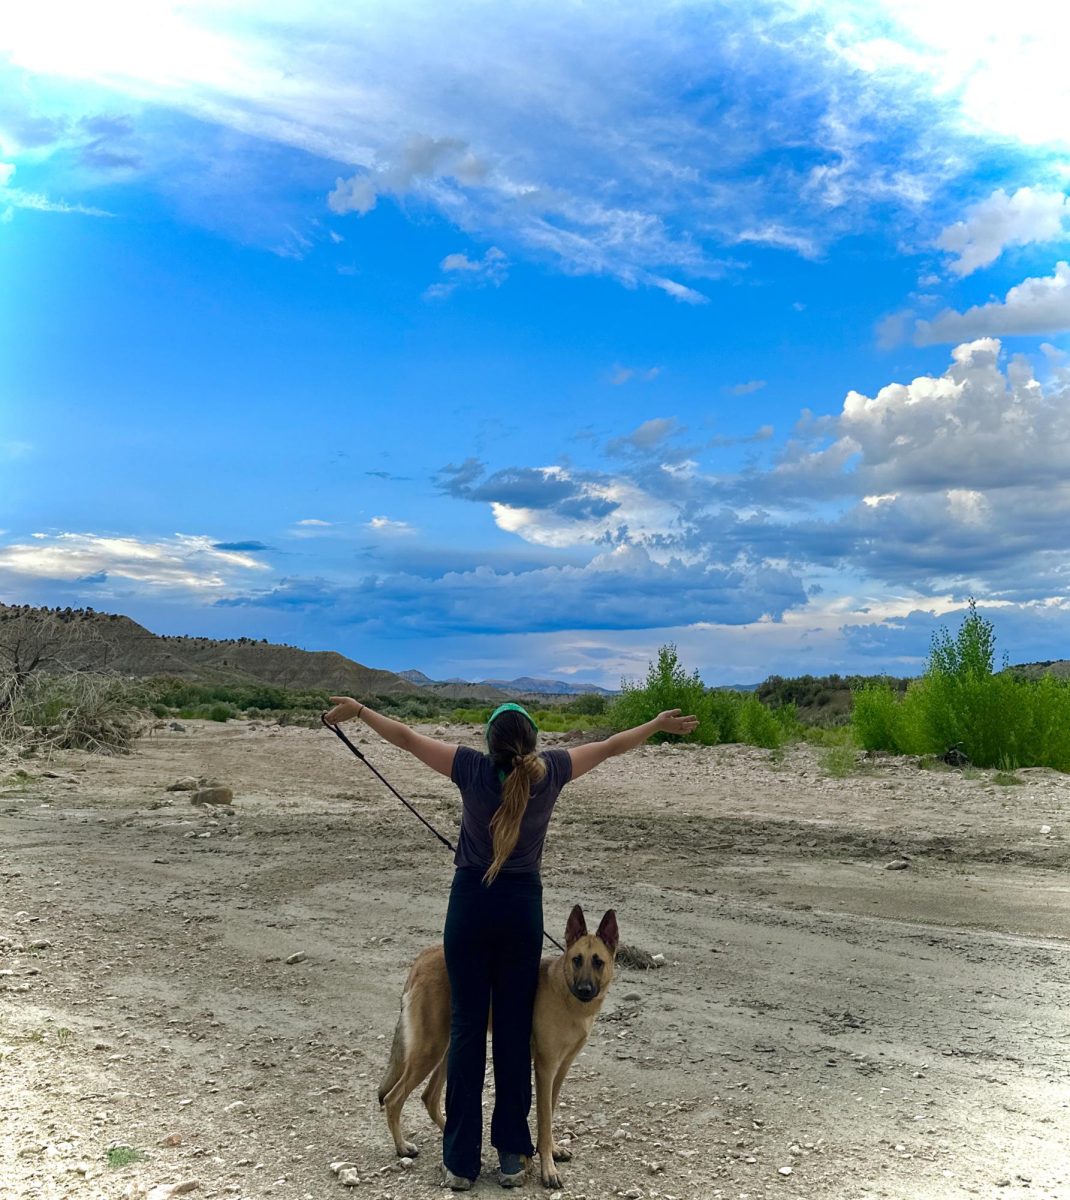 A+girl+and+her+dog+enjoy+the+blue+cloudy+skies+and+fresh+air+on+a+walk+in+Cannonville%2C+Utah%2C+appreciating+the+beauty+of+nature+and+calming+energy+it+brings.+Taken+by+Ava+Aragon+on+July+29%2C+2023.